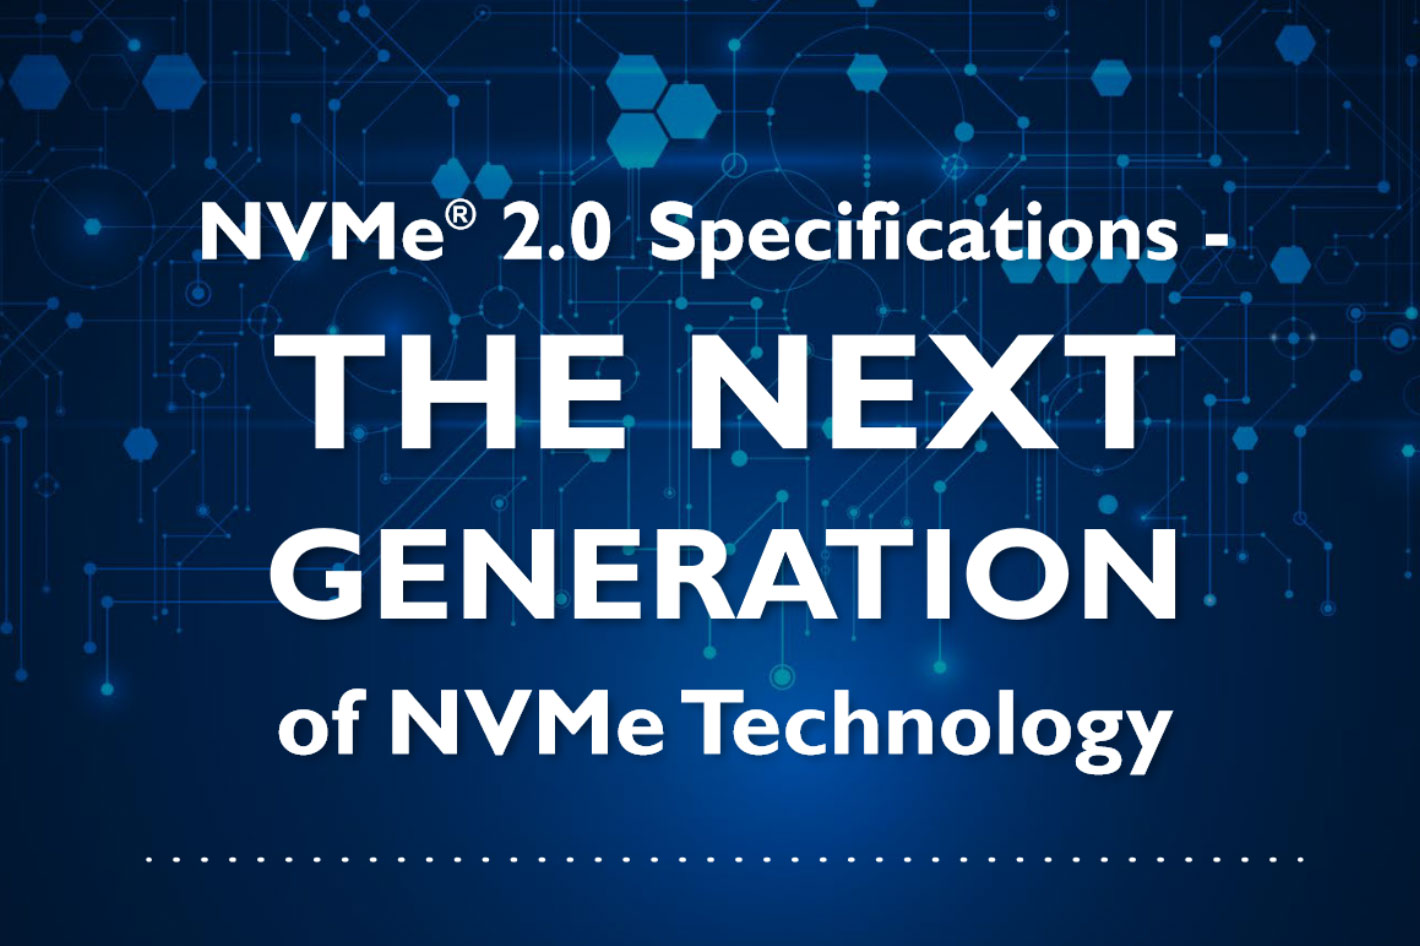 New NVMe 2.0 standard includes support for Hard Disk Drives